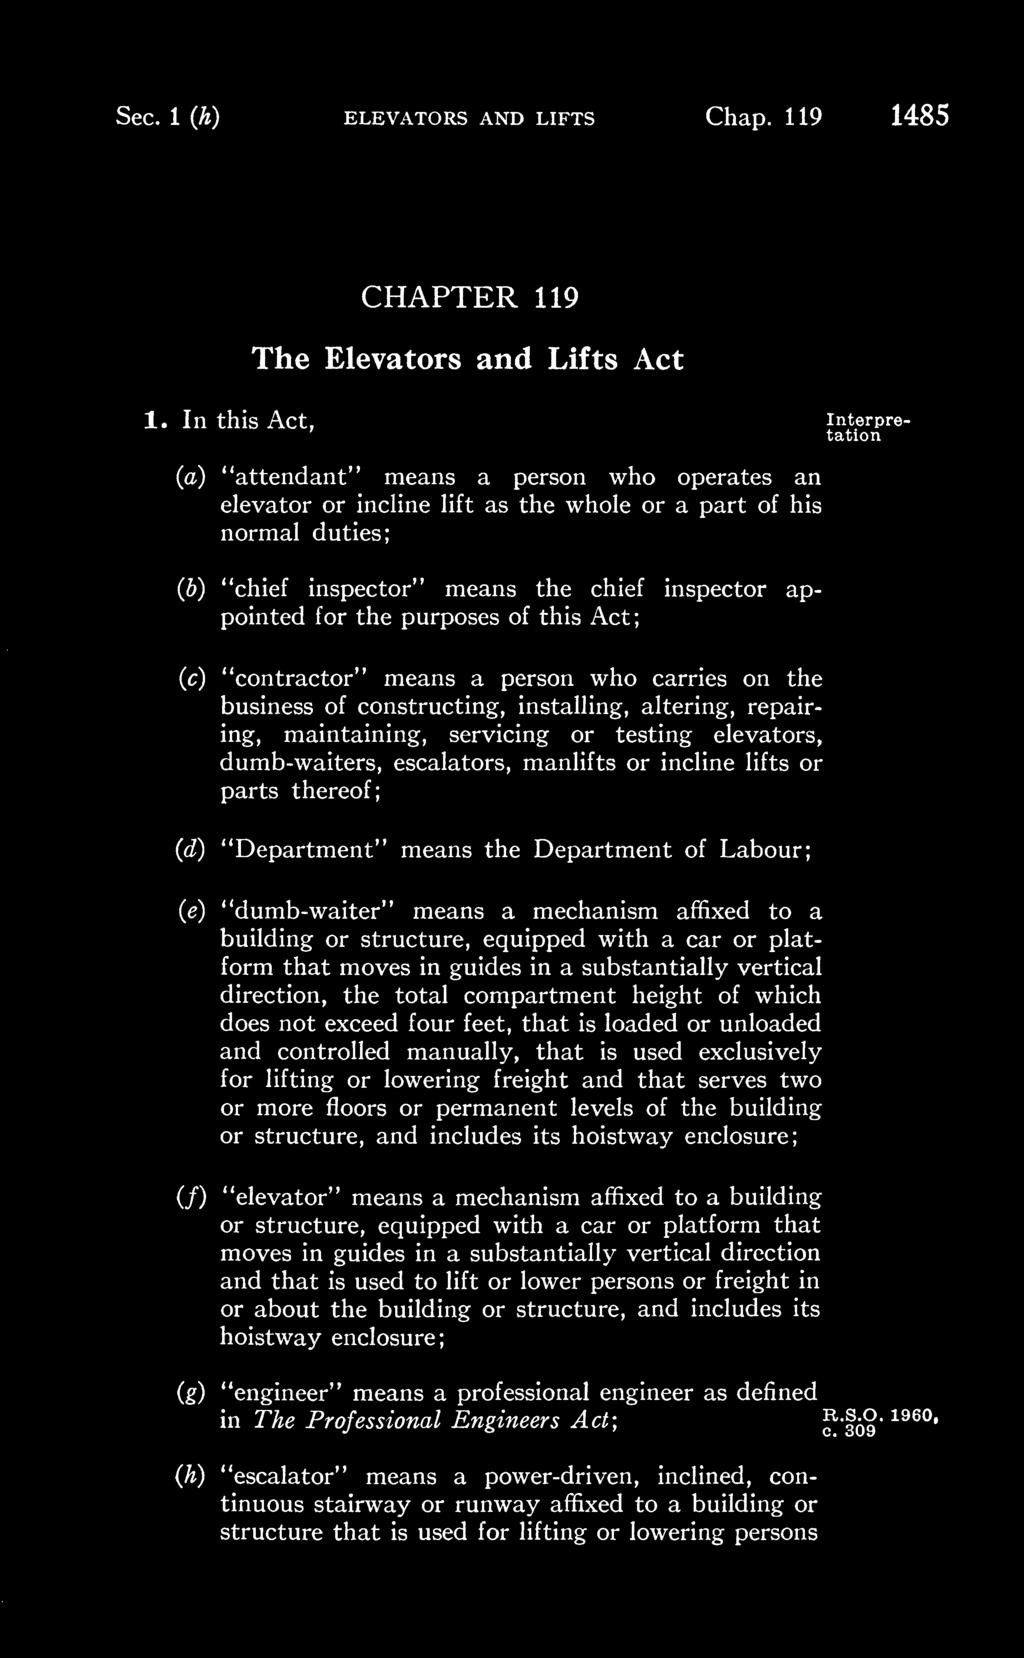 appointed for the purposes of this Act; {c) "contractor" means a person who carries on the business of constructing, installing, altering, repairing, maintaining, servicing or testing elevators,